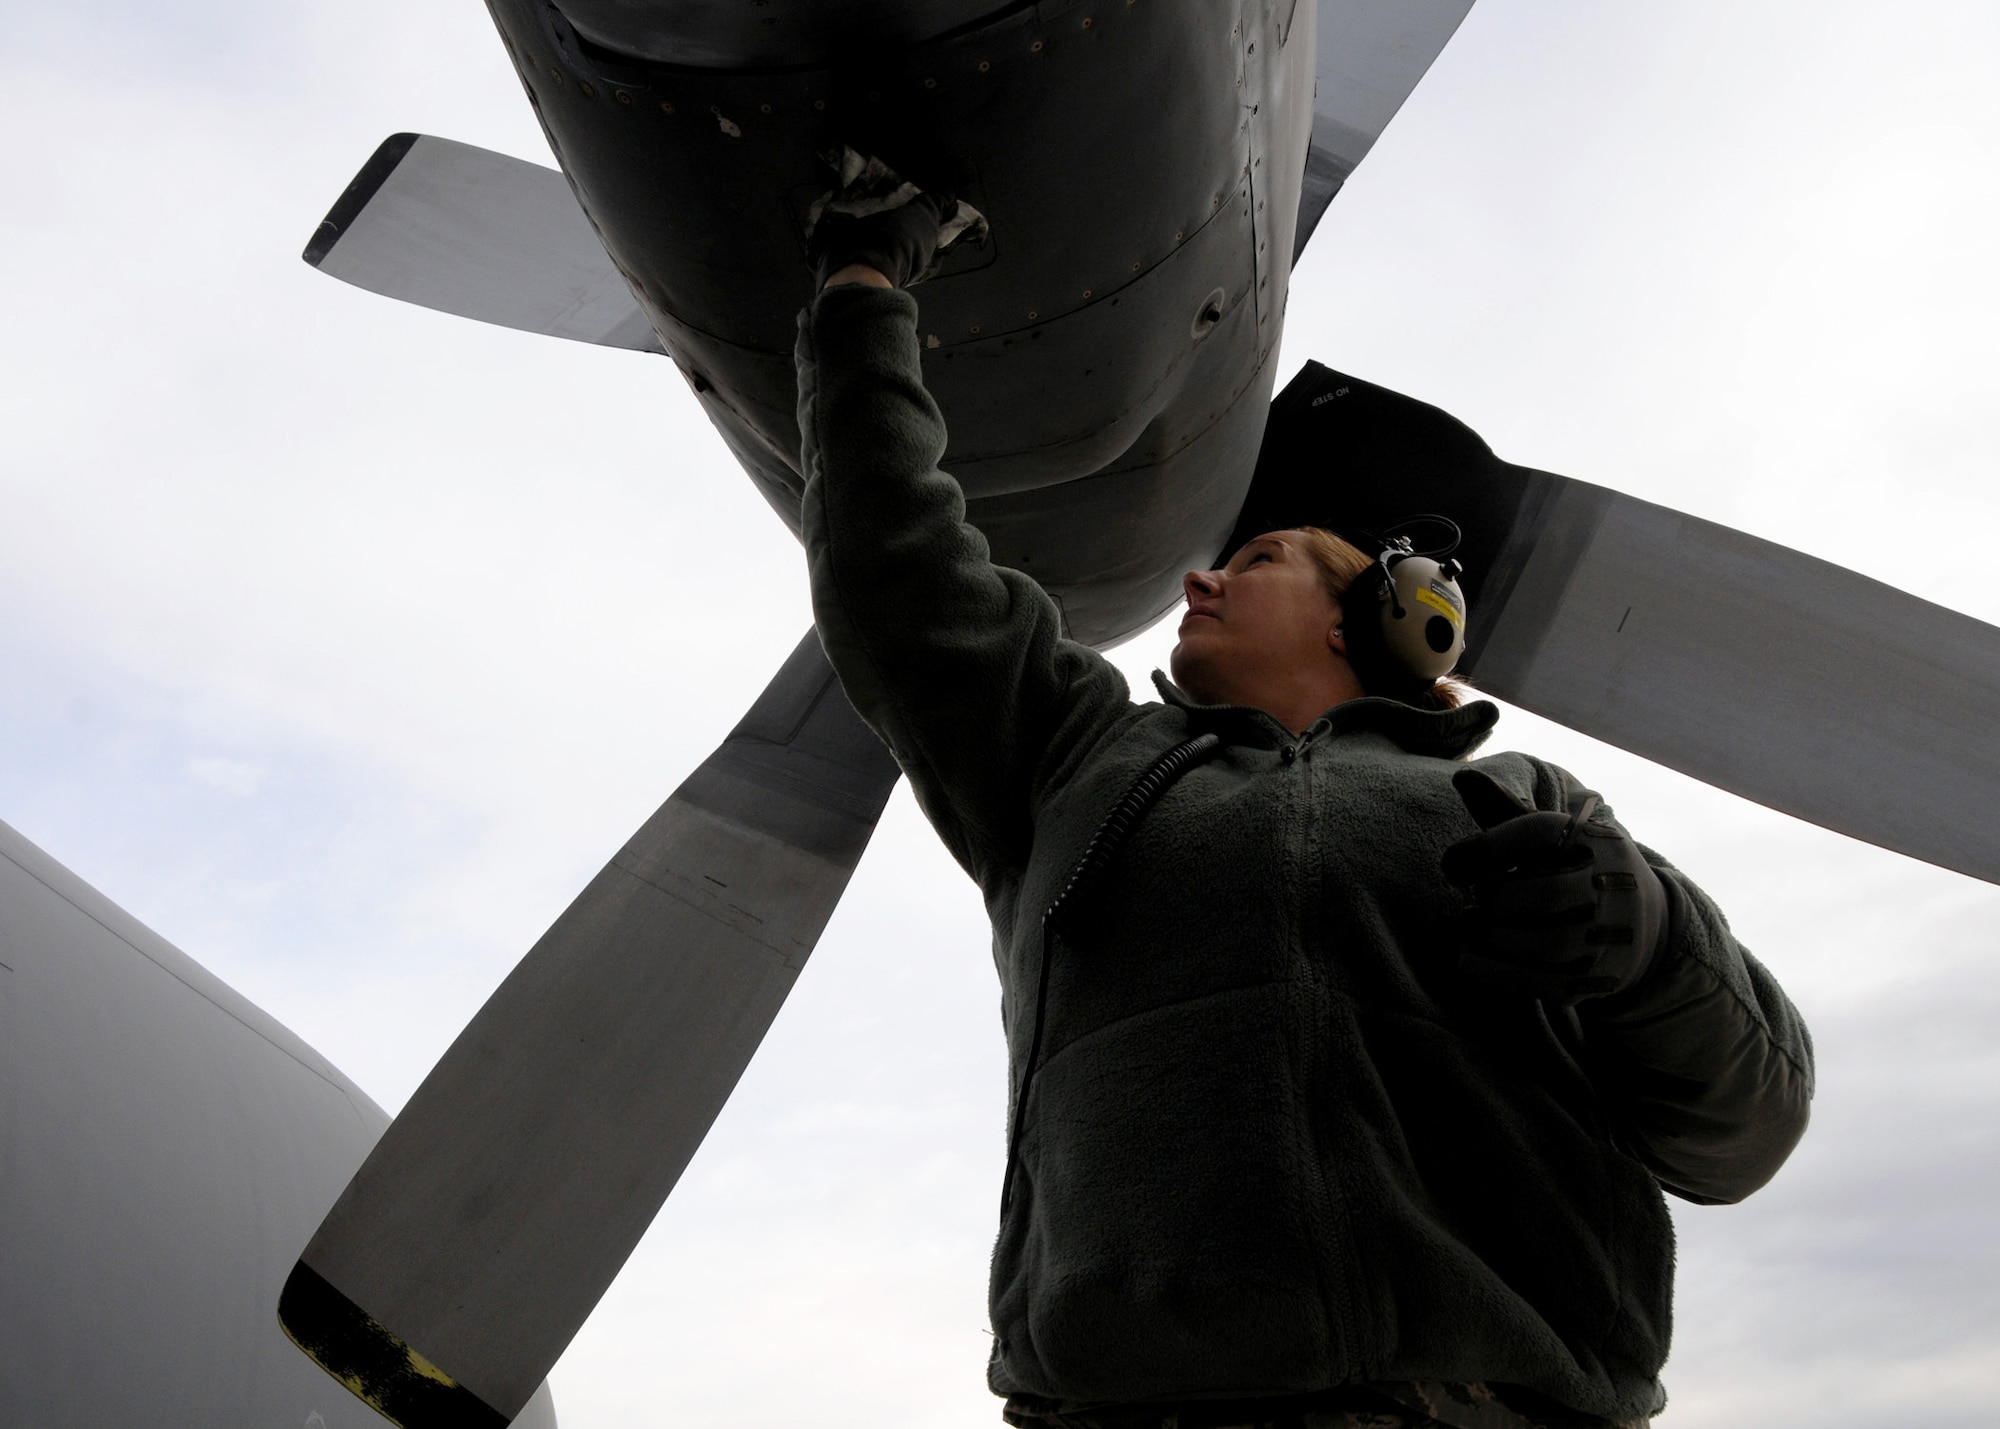 Staff Sgt. Jennifer Fender, 179th Maintenance Group, wipes off fluid from Engine 3 of MC-130E Combat Talon #555 prior to its final flight May 5 from Gowen Field, Idaho.  919th Special Operations Wing maintainers, along with the 179th were sent to Boise, Idaho, to prepare four Talons to take off for one more mission – a flight into retirement and decommissioning.  Three of the Talons flew to Davis-Monthan Air Force Base, Ariz.  The other went to Hurlburt Field, Fla., to be placed in the Air Force Special Operations Command airpark.  (U.S. Air Force photo/Tech. Sgt. Samuel King Jr.) 